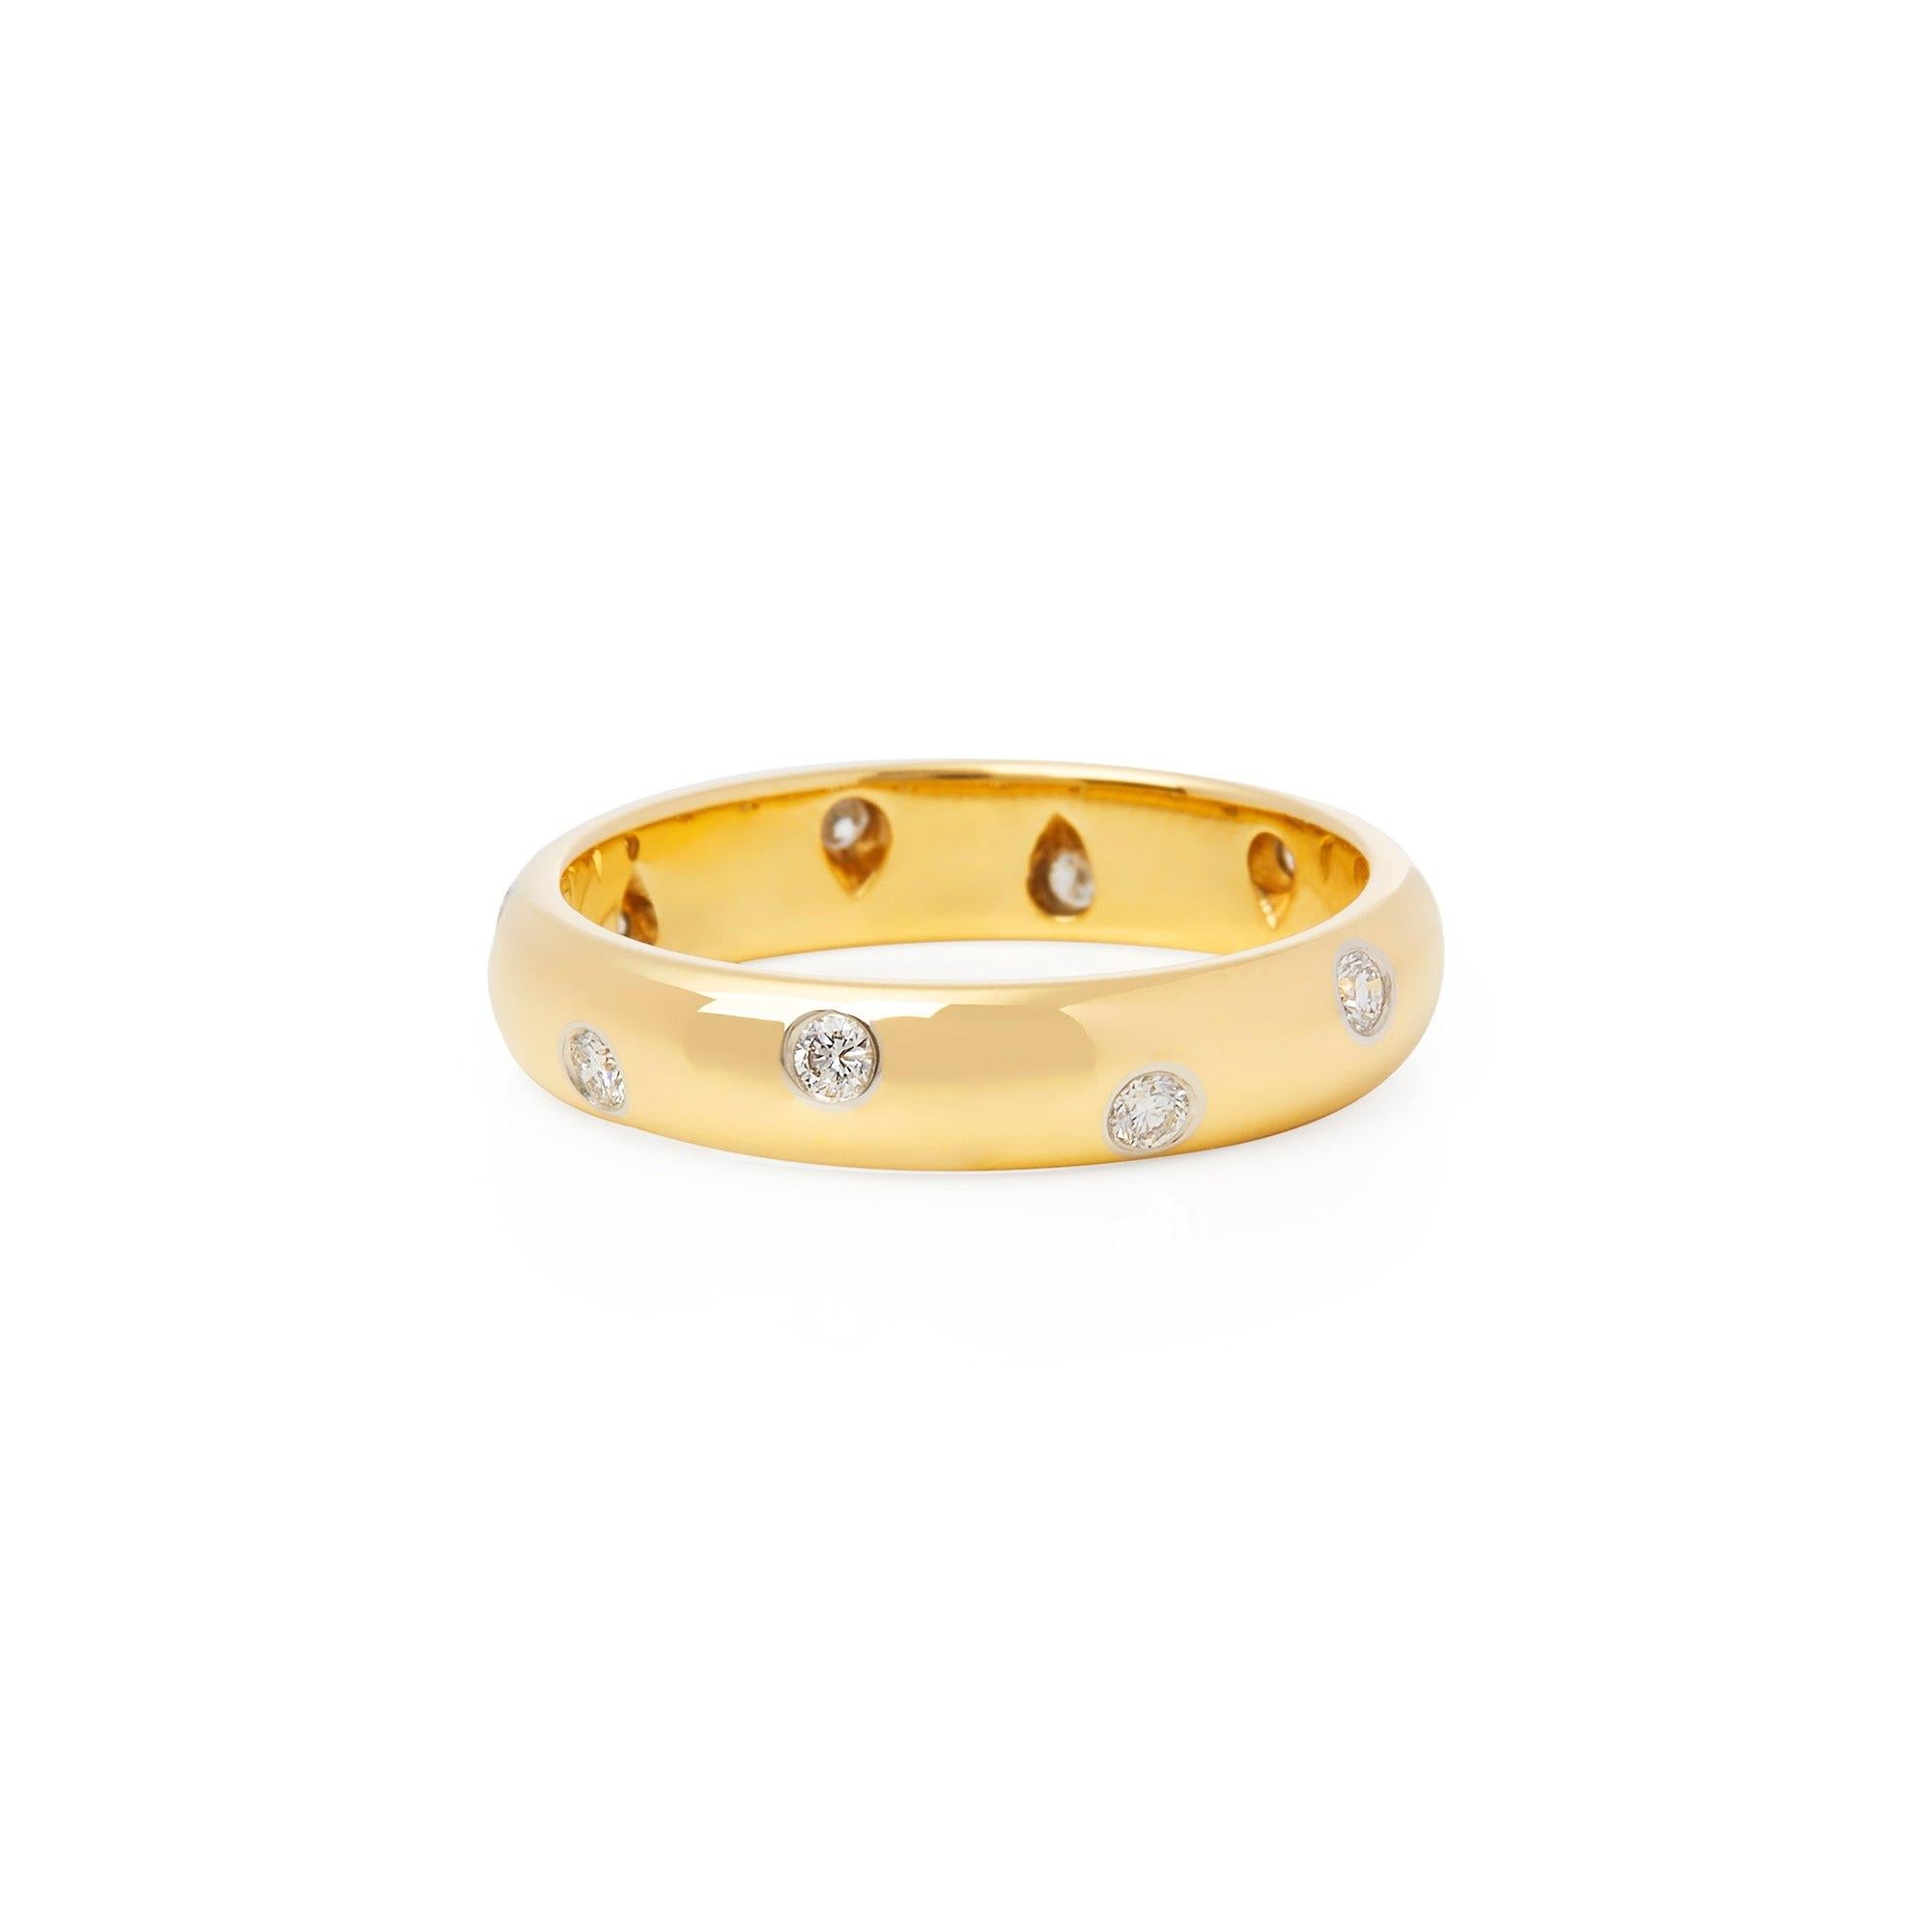 This Ring by Tiffany & Co is from their Signature Etoile collection and features Twelve Round Brilliant Cut Diamonds Mounted in an 18k Yellow Gold Band. Finger Size UK O 1/2, EU Size 55, USA Size 7. Complete with Xupes Presentation Box. Our Xupes